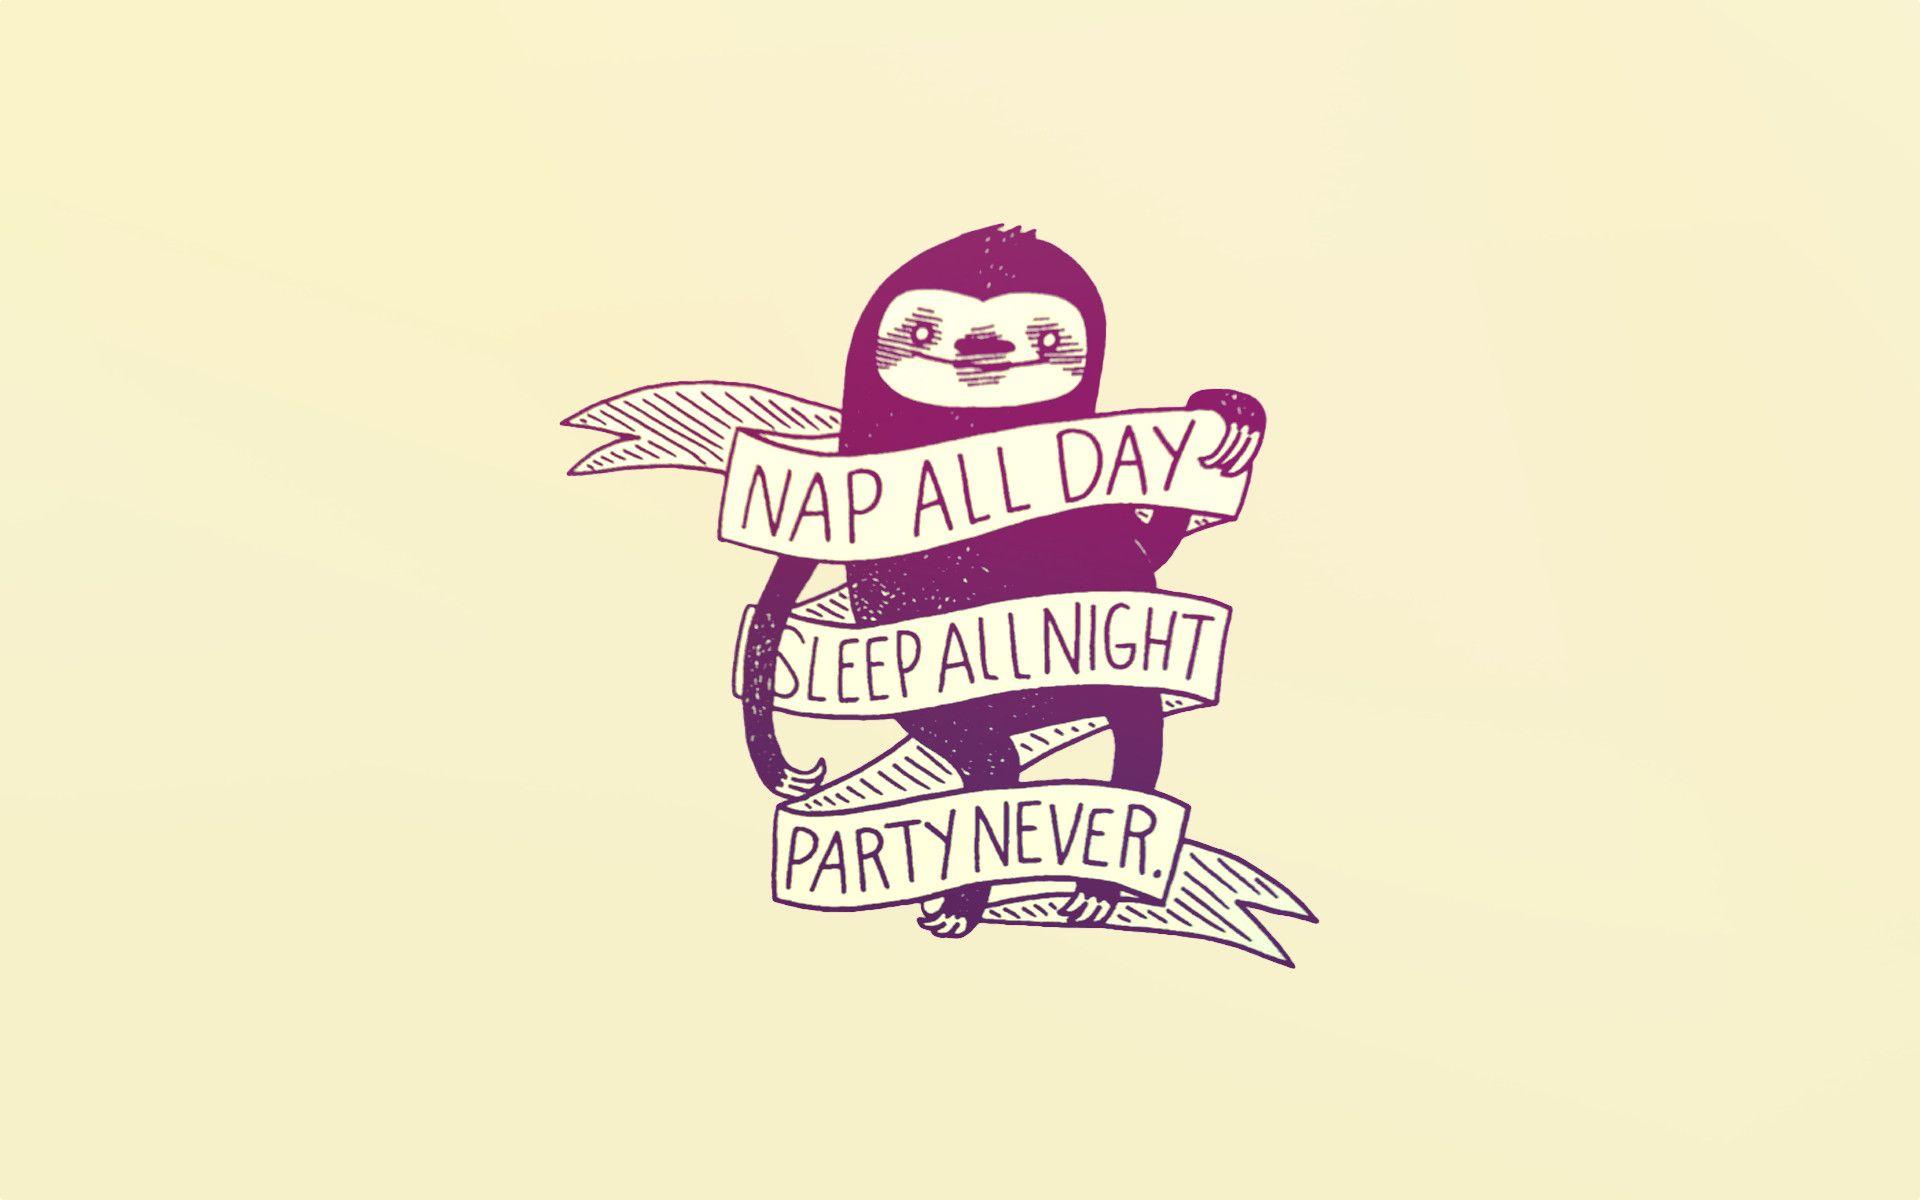 Made a wallpaper out of Nap all day sloth. SLOTHS